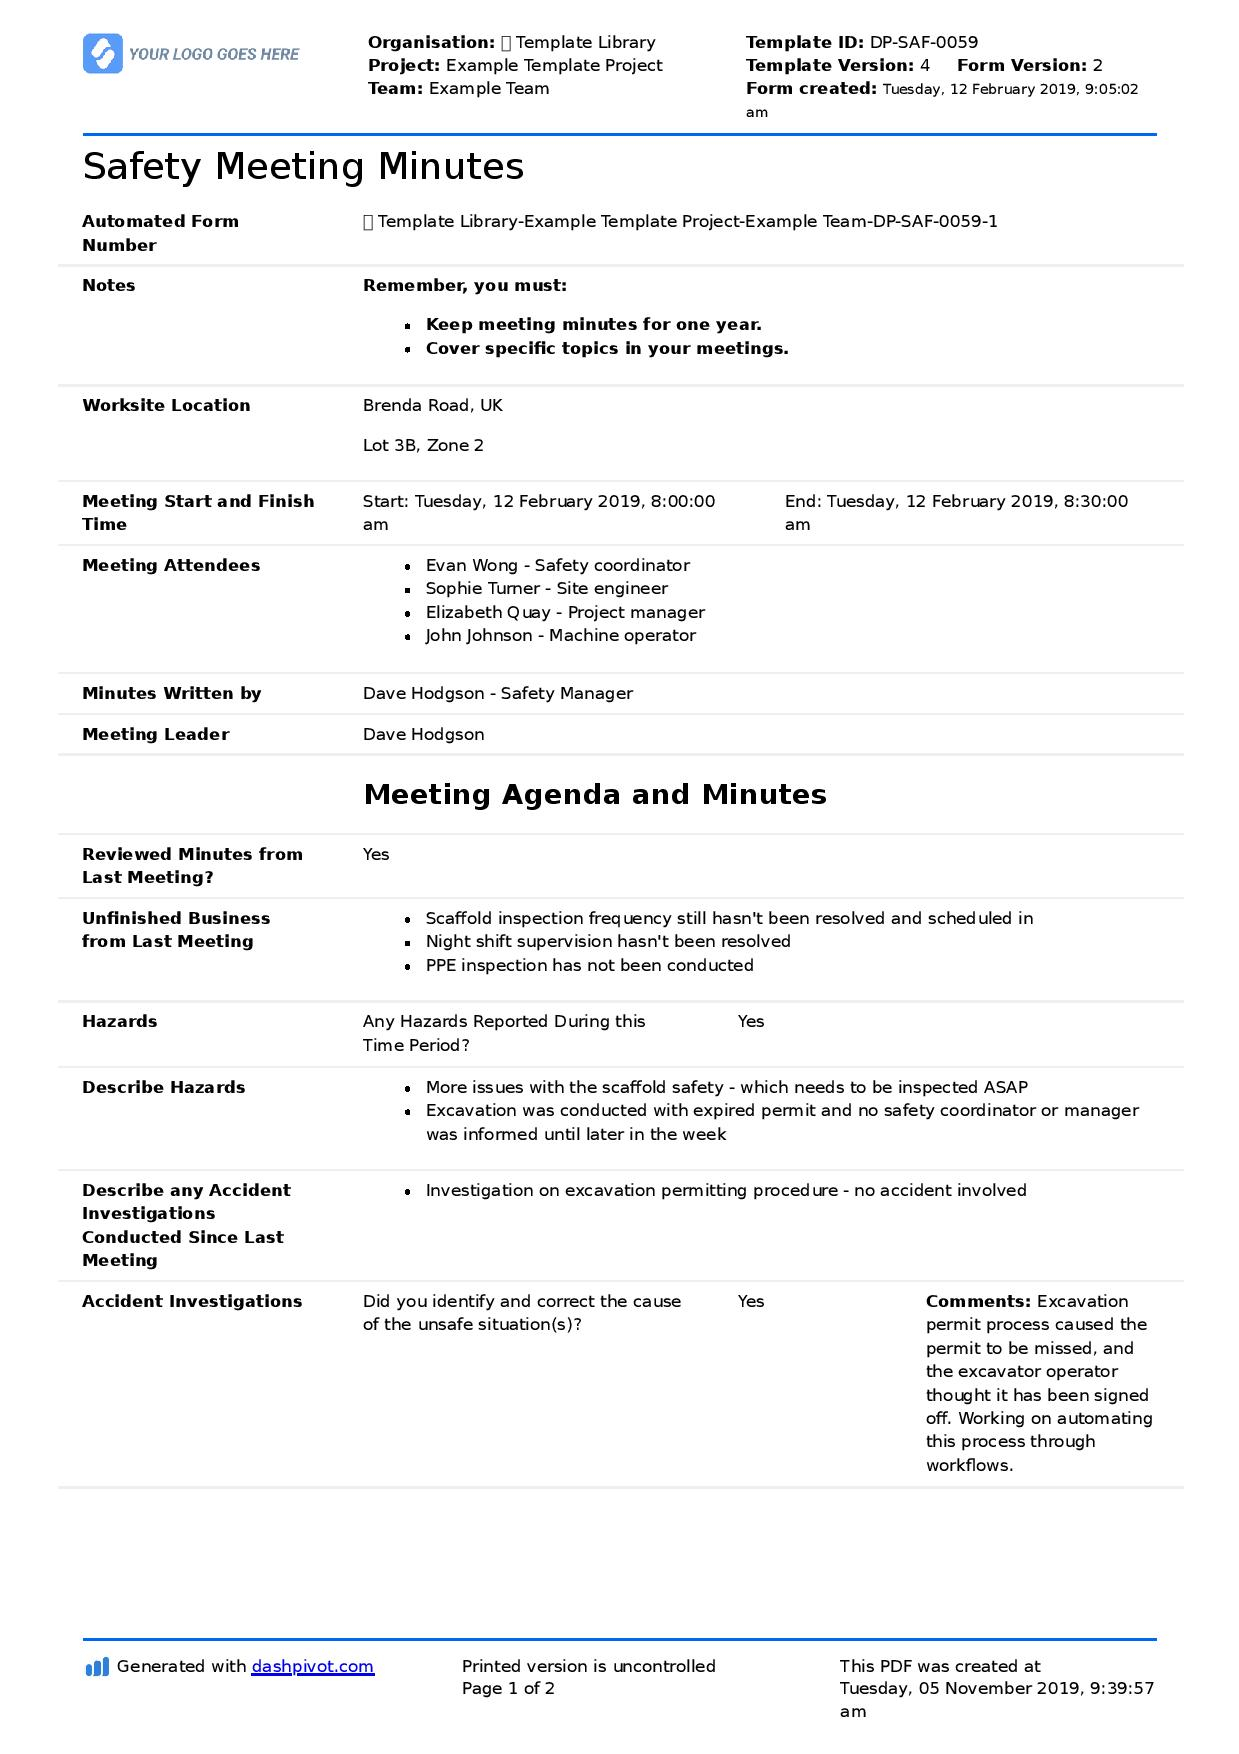 Safety Briefing Template Free For Any Health Safety Briefing within dimensions 1239 X 1754